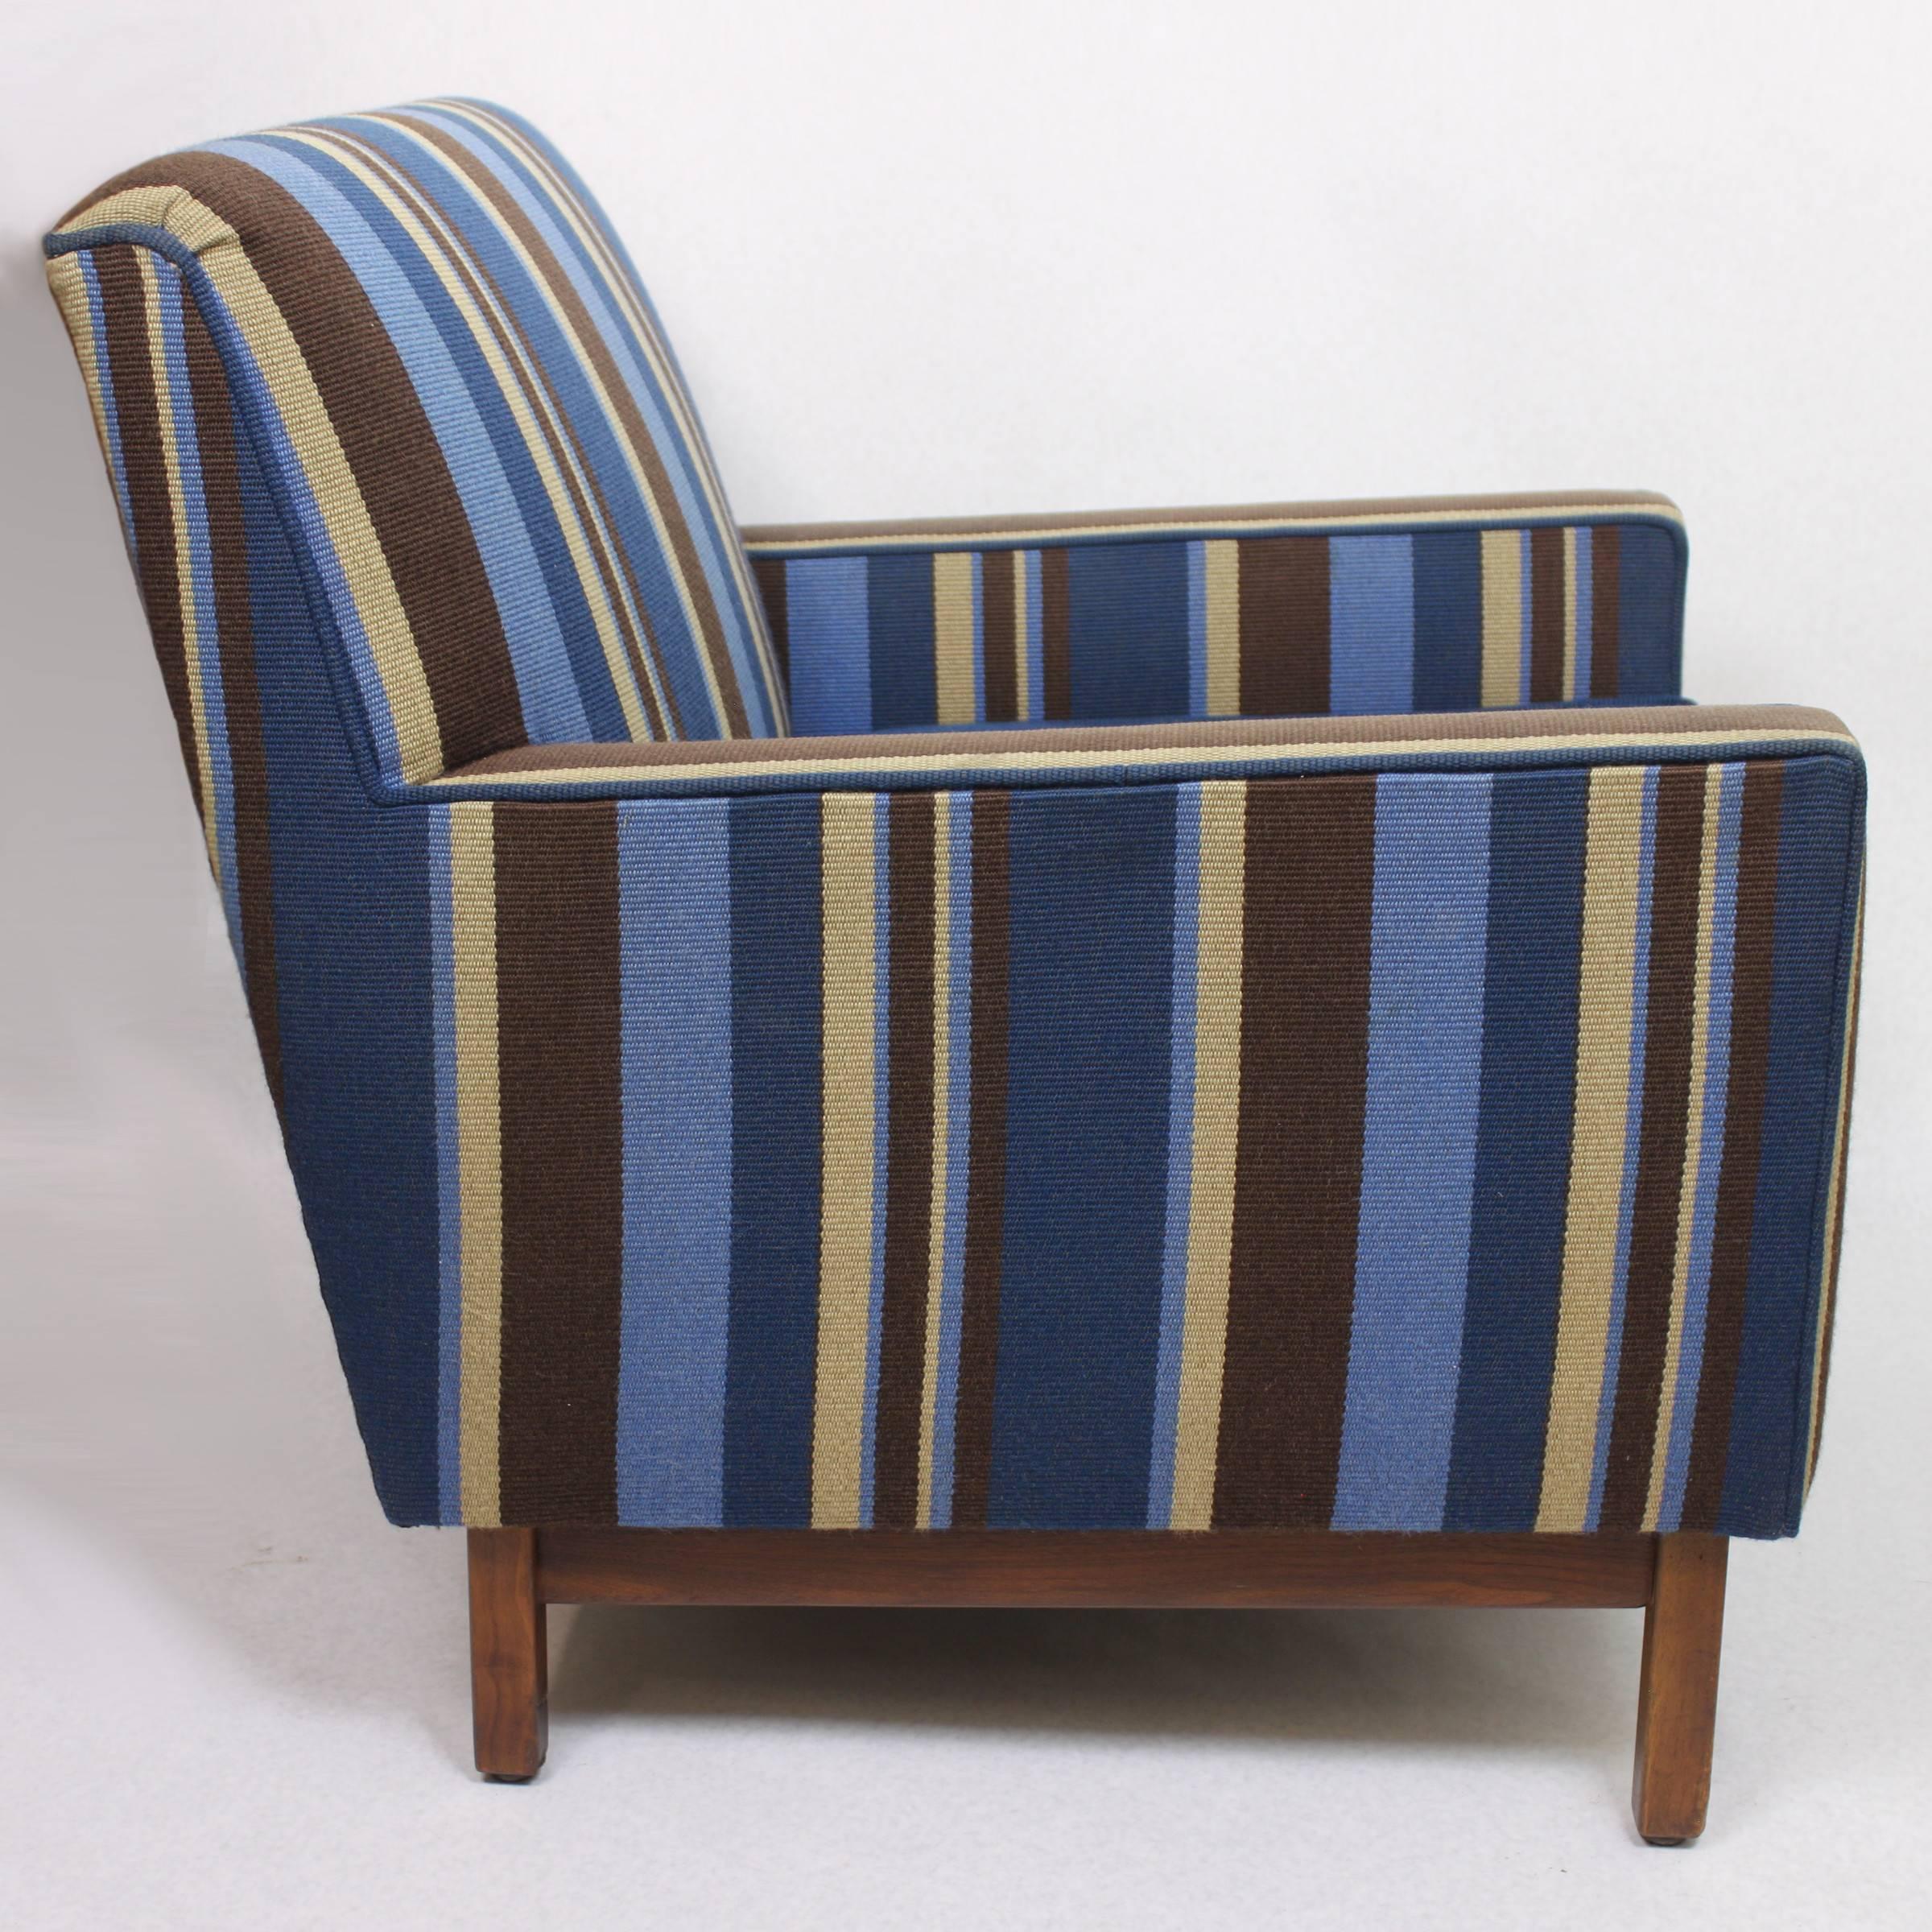 Upholstery Spectacular Pair of Mid-Century Modern Blue Striped Lounge Chairs by Gunlocke